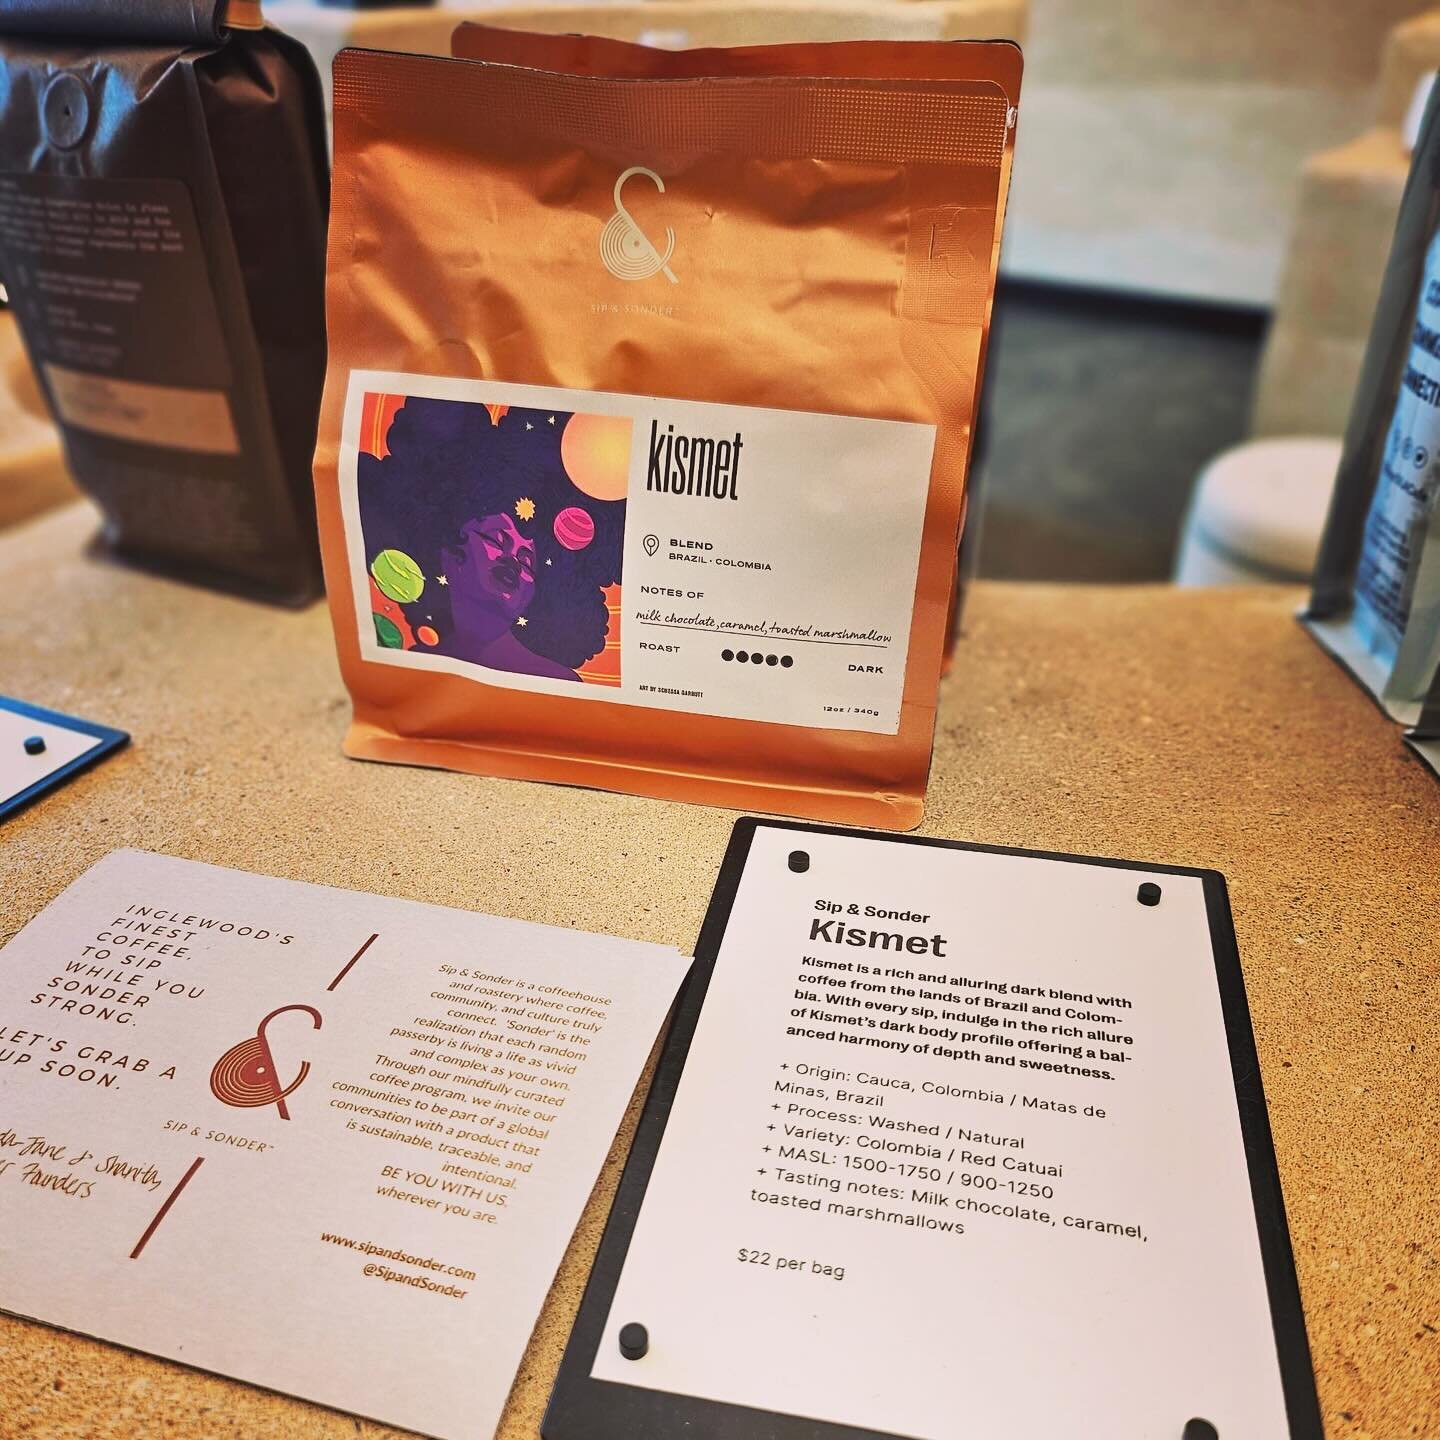 👀 Spotted! @SipandSonder&rsquo;s newest roast profile KISMET has been the feature coffee at @Fellowproducts stores all month long!  Stop by today for a bag and all your coffee product needs, and tell &lsquo;em we sent you! 😉
:
🇧🇷🇨🇴 KISMET, a da